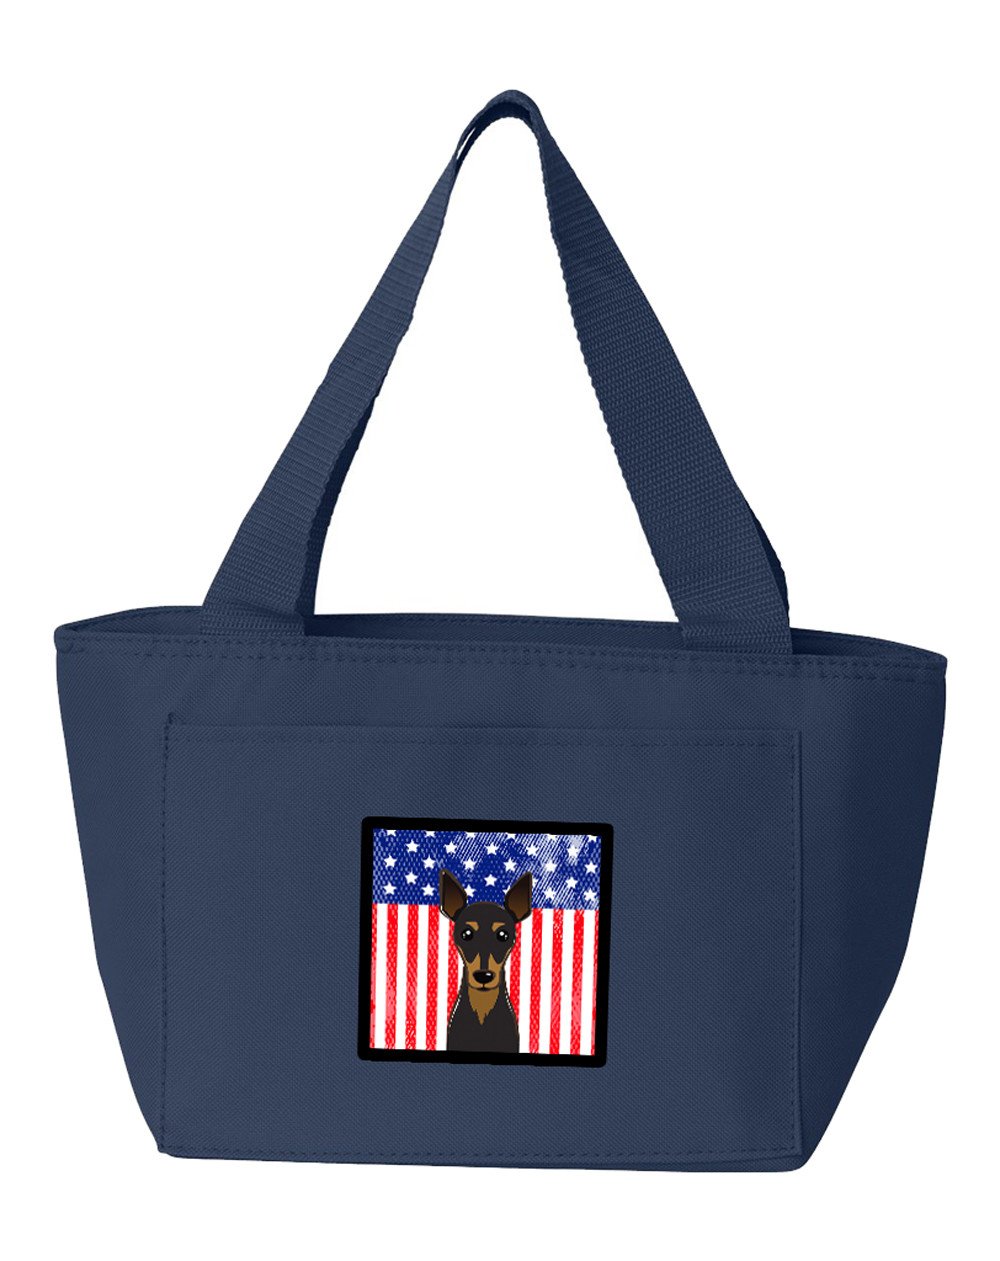 American Flag and Min Pin Lunch Bag BB2170NA-8808 by Caroline's Treasures